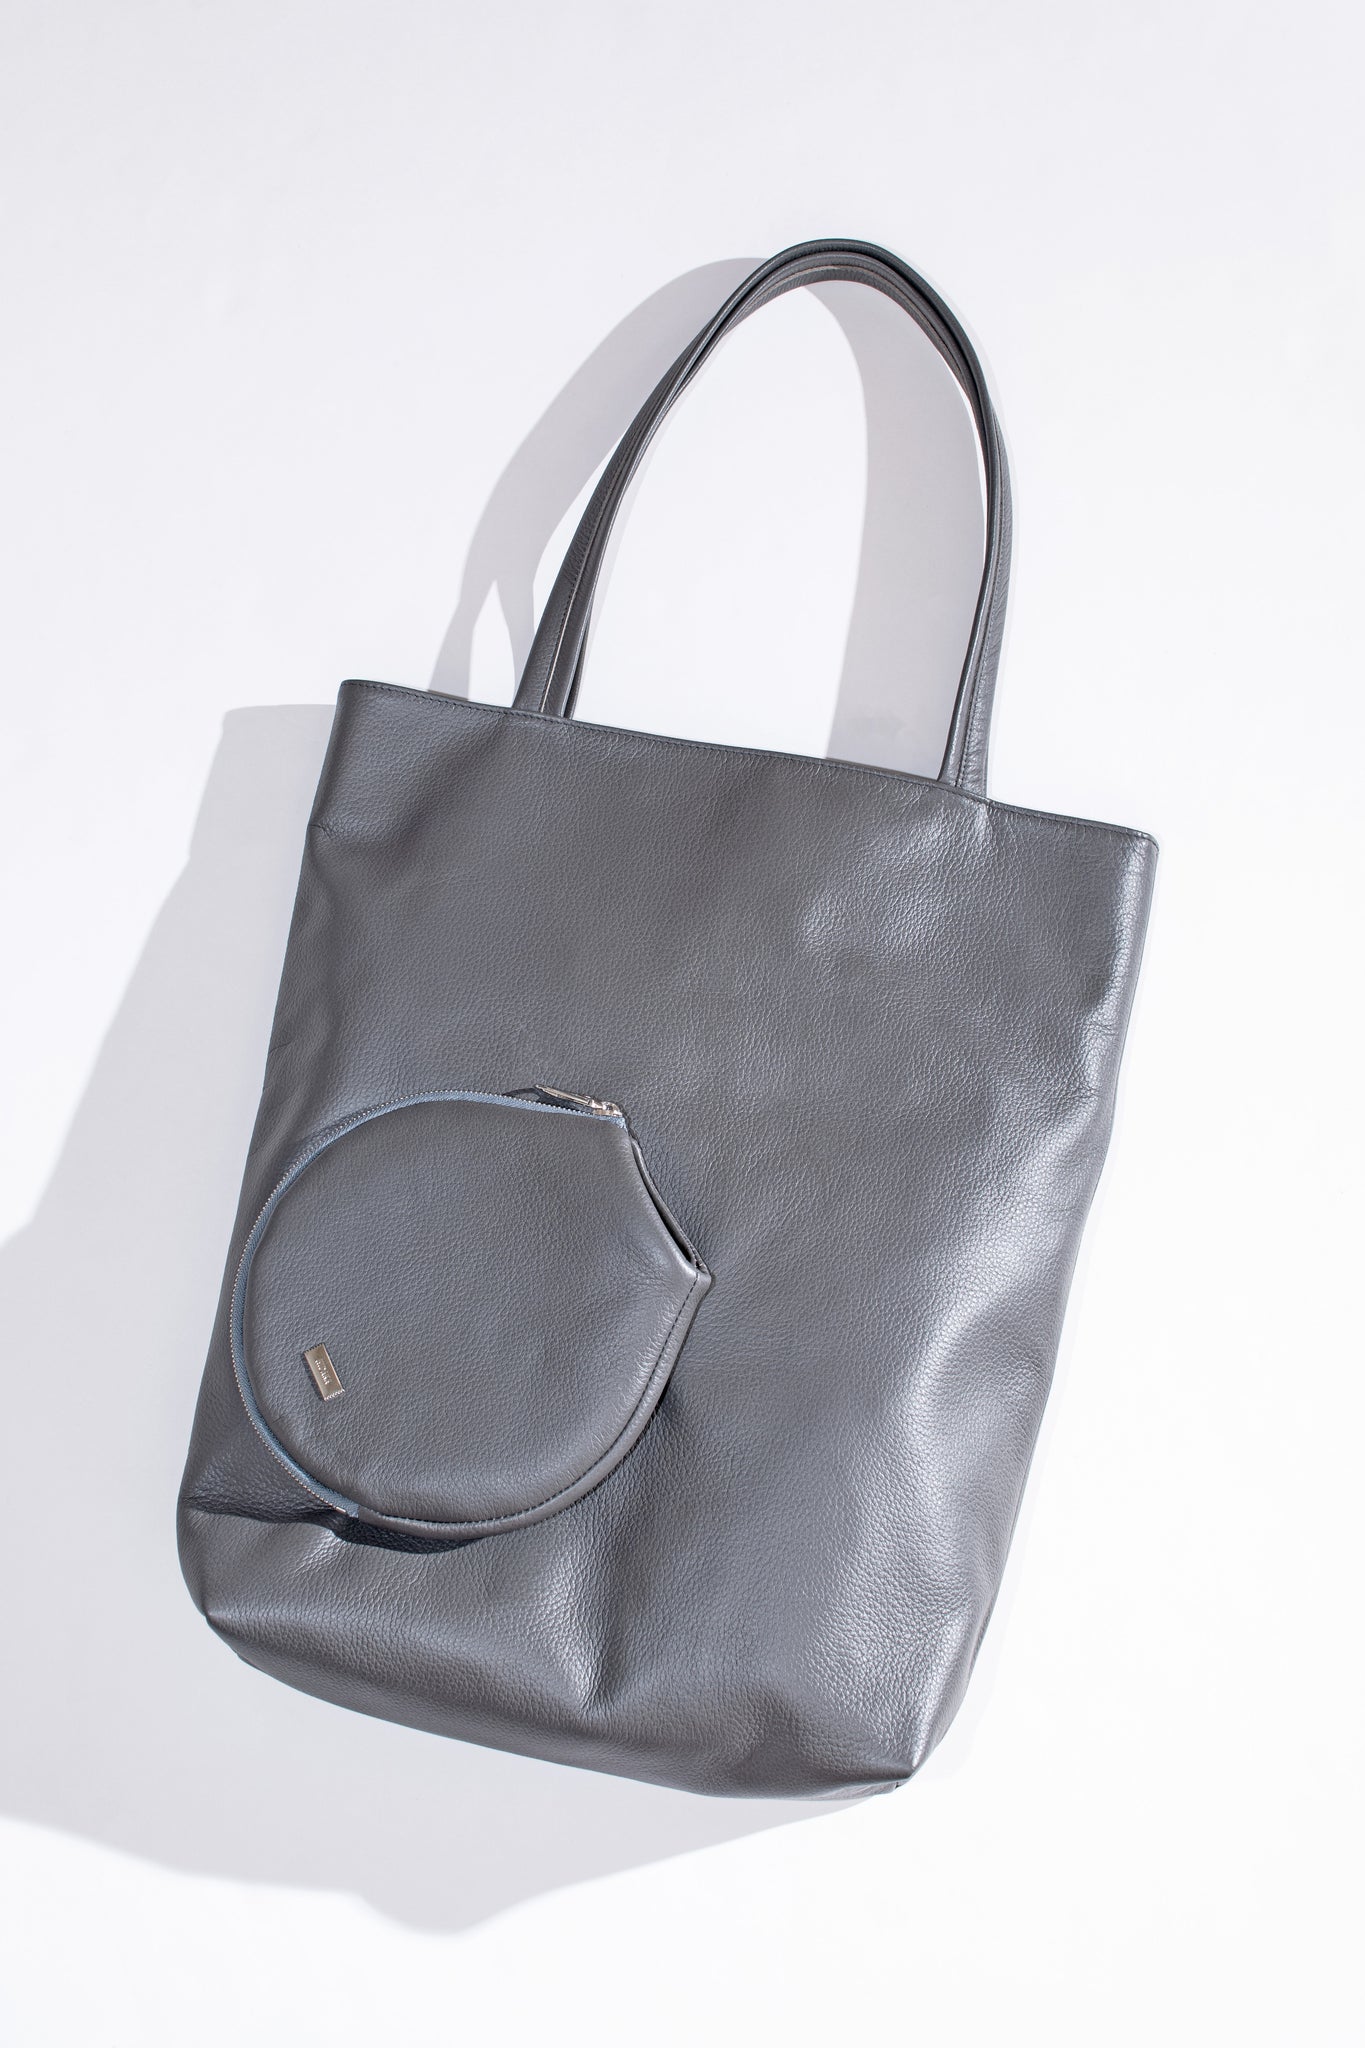 PING-PONG LEATHER TOTE